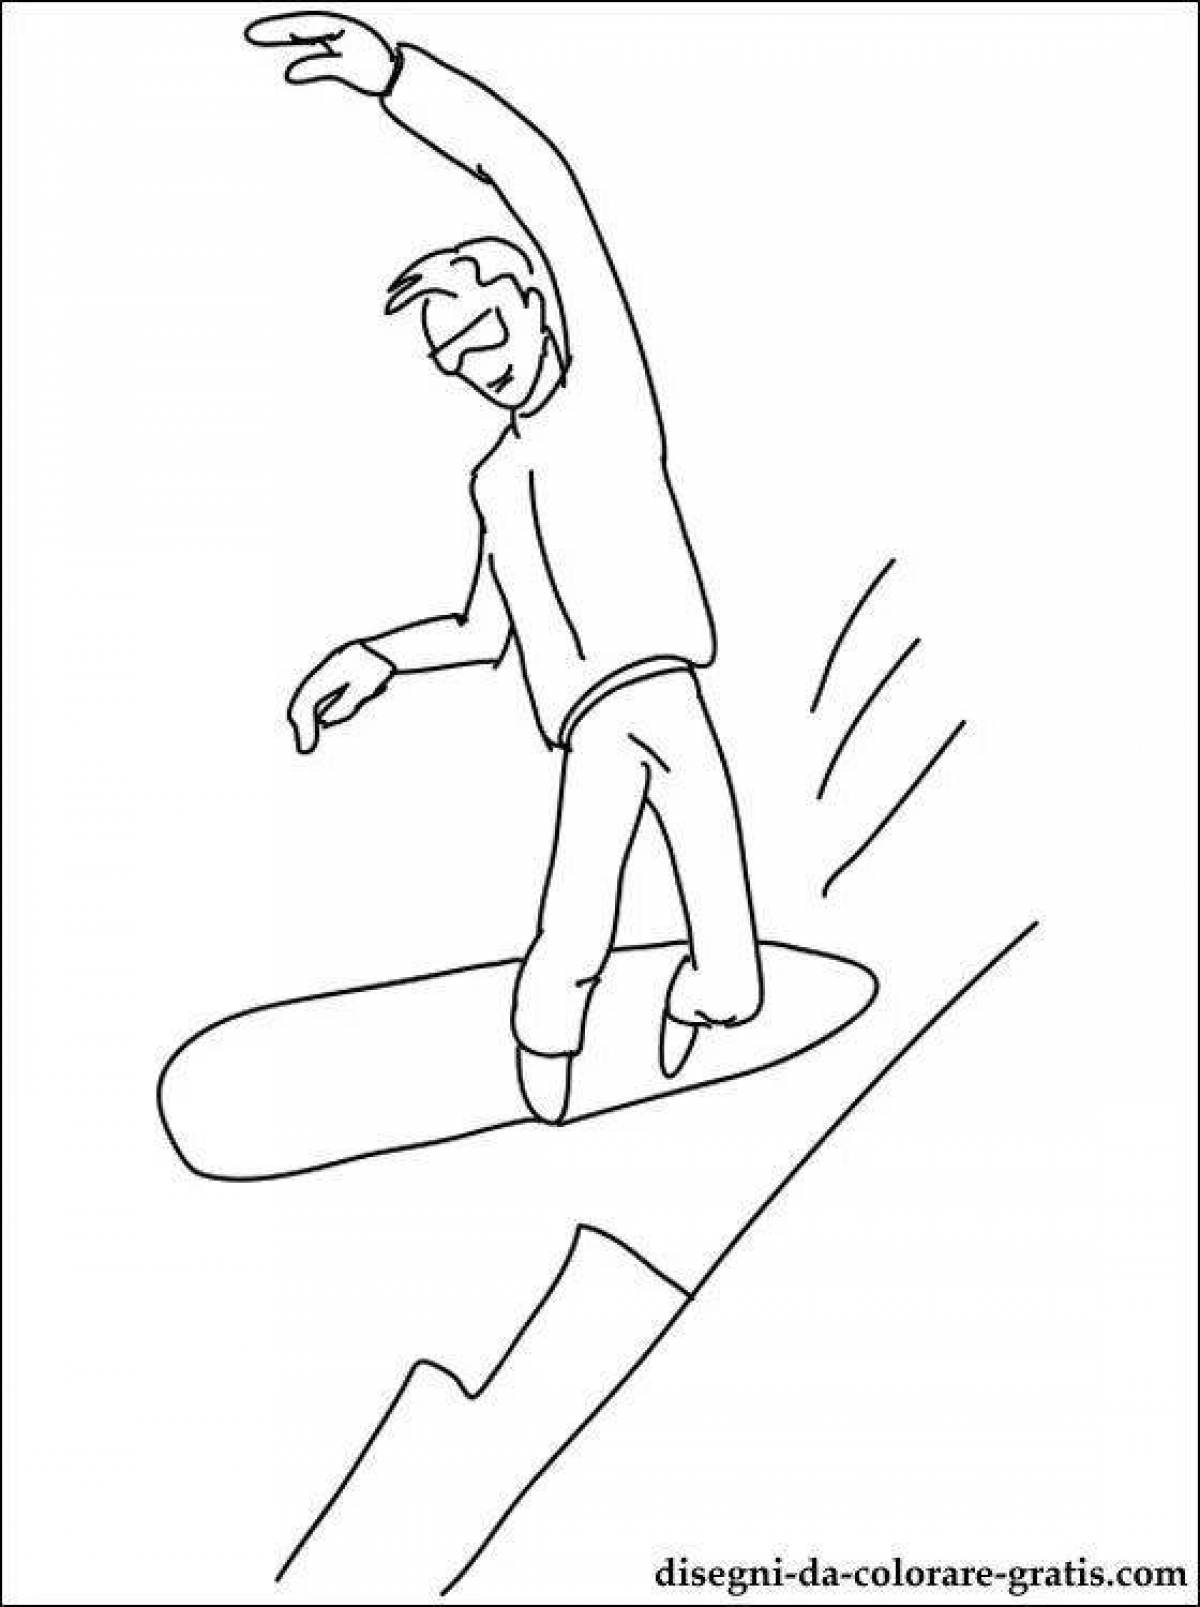 Great snowboard coloring book